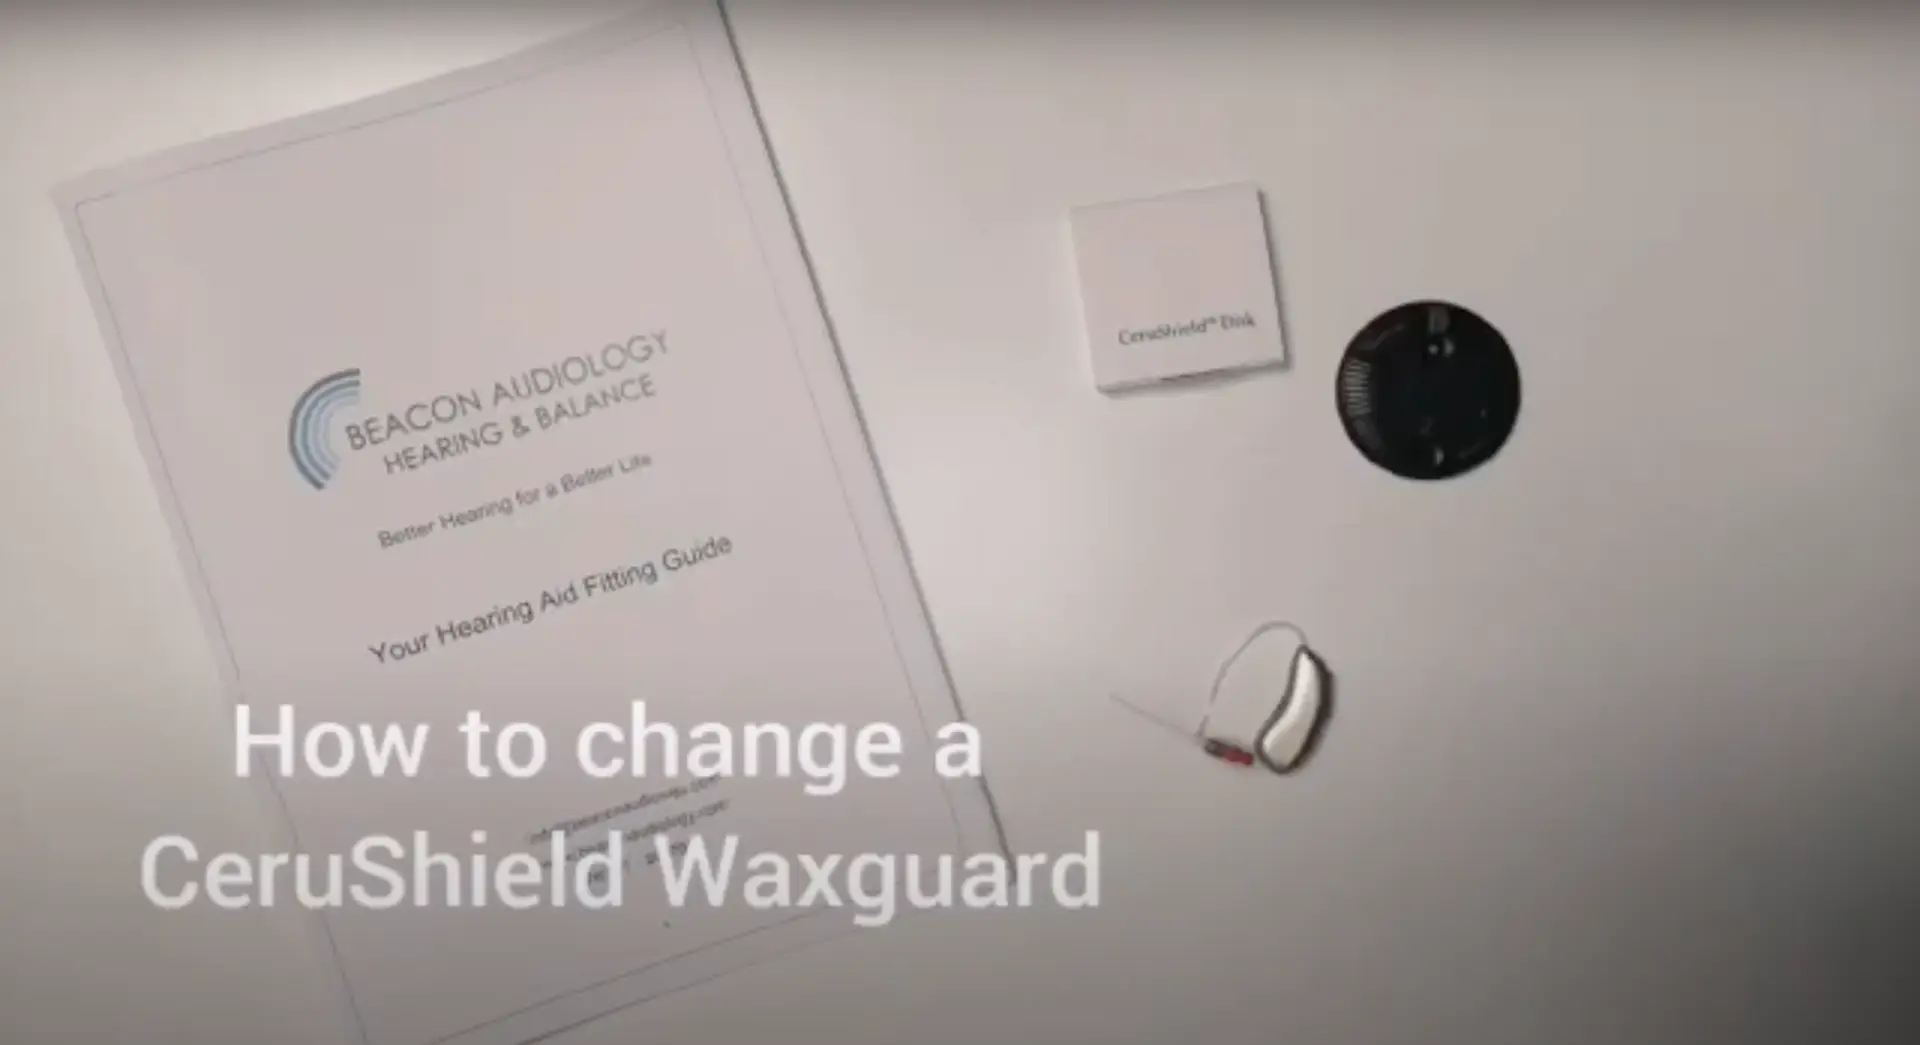 How to change a Cerushield wax guard Image